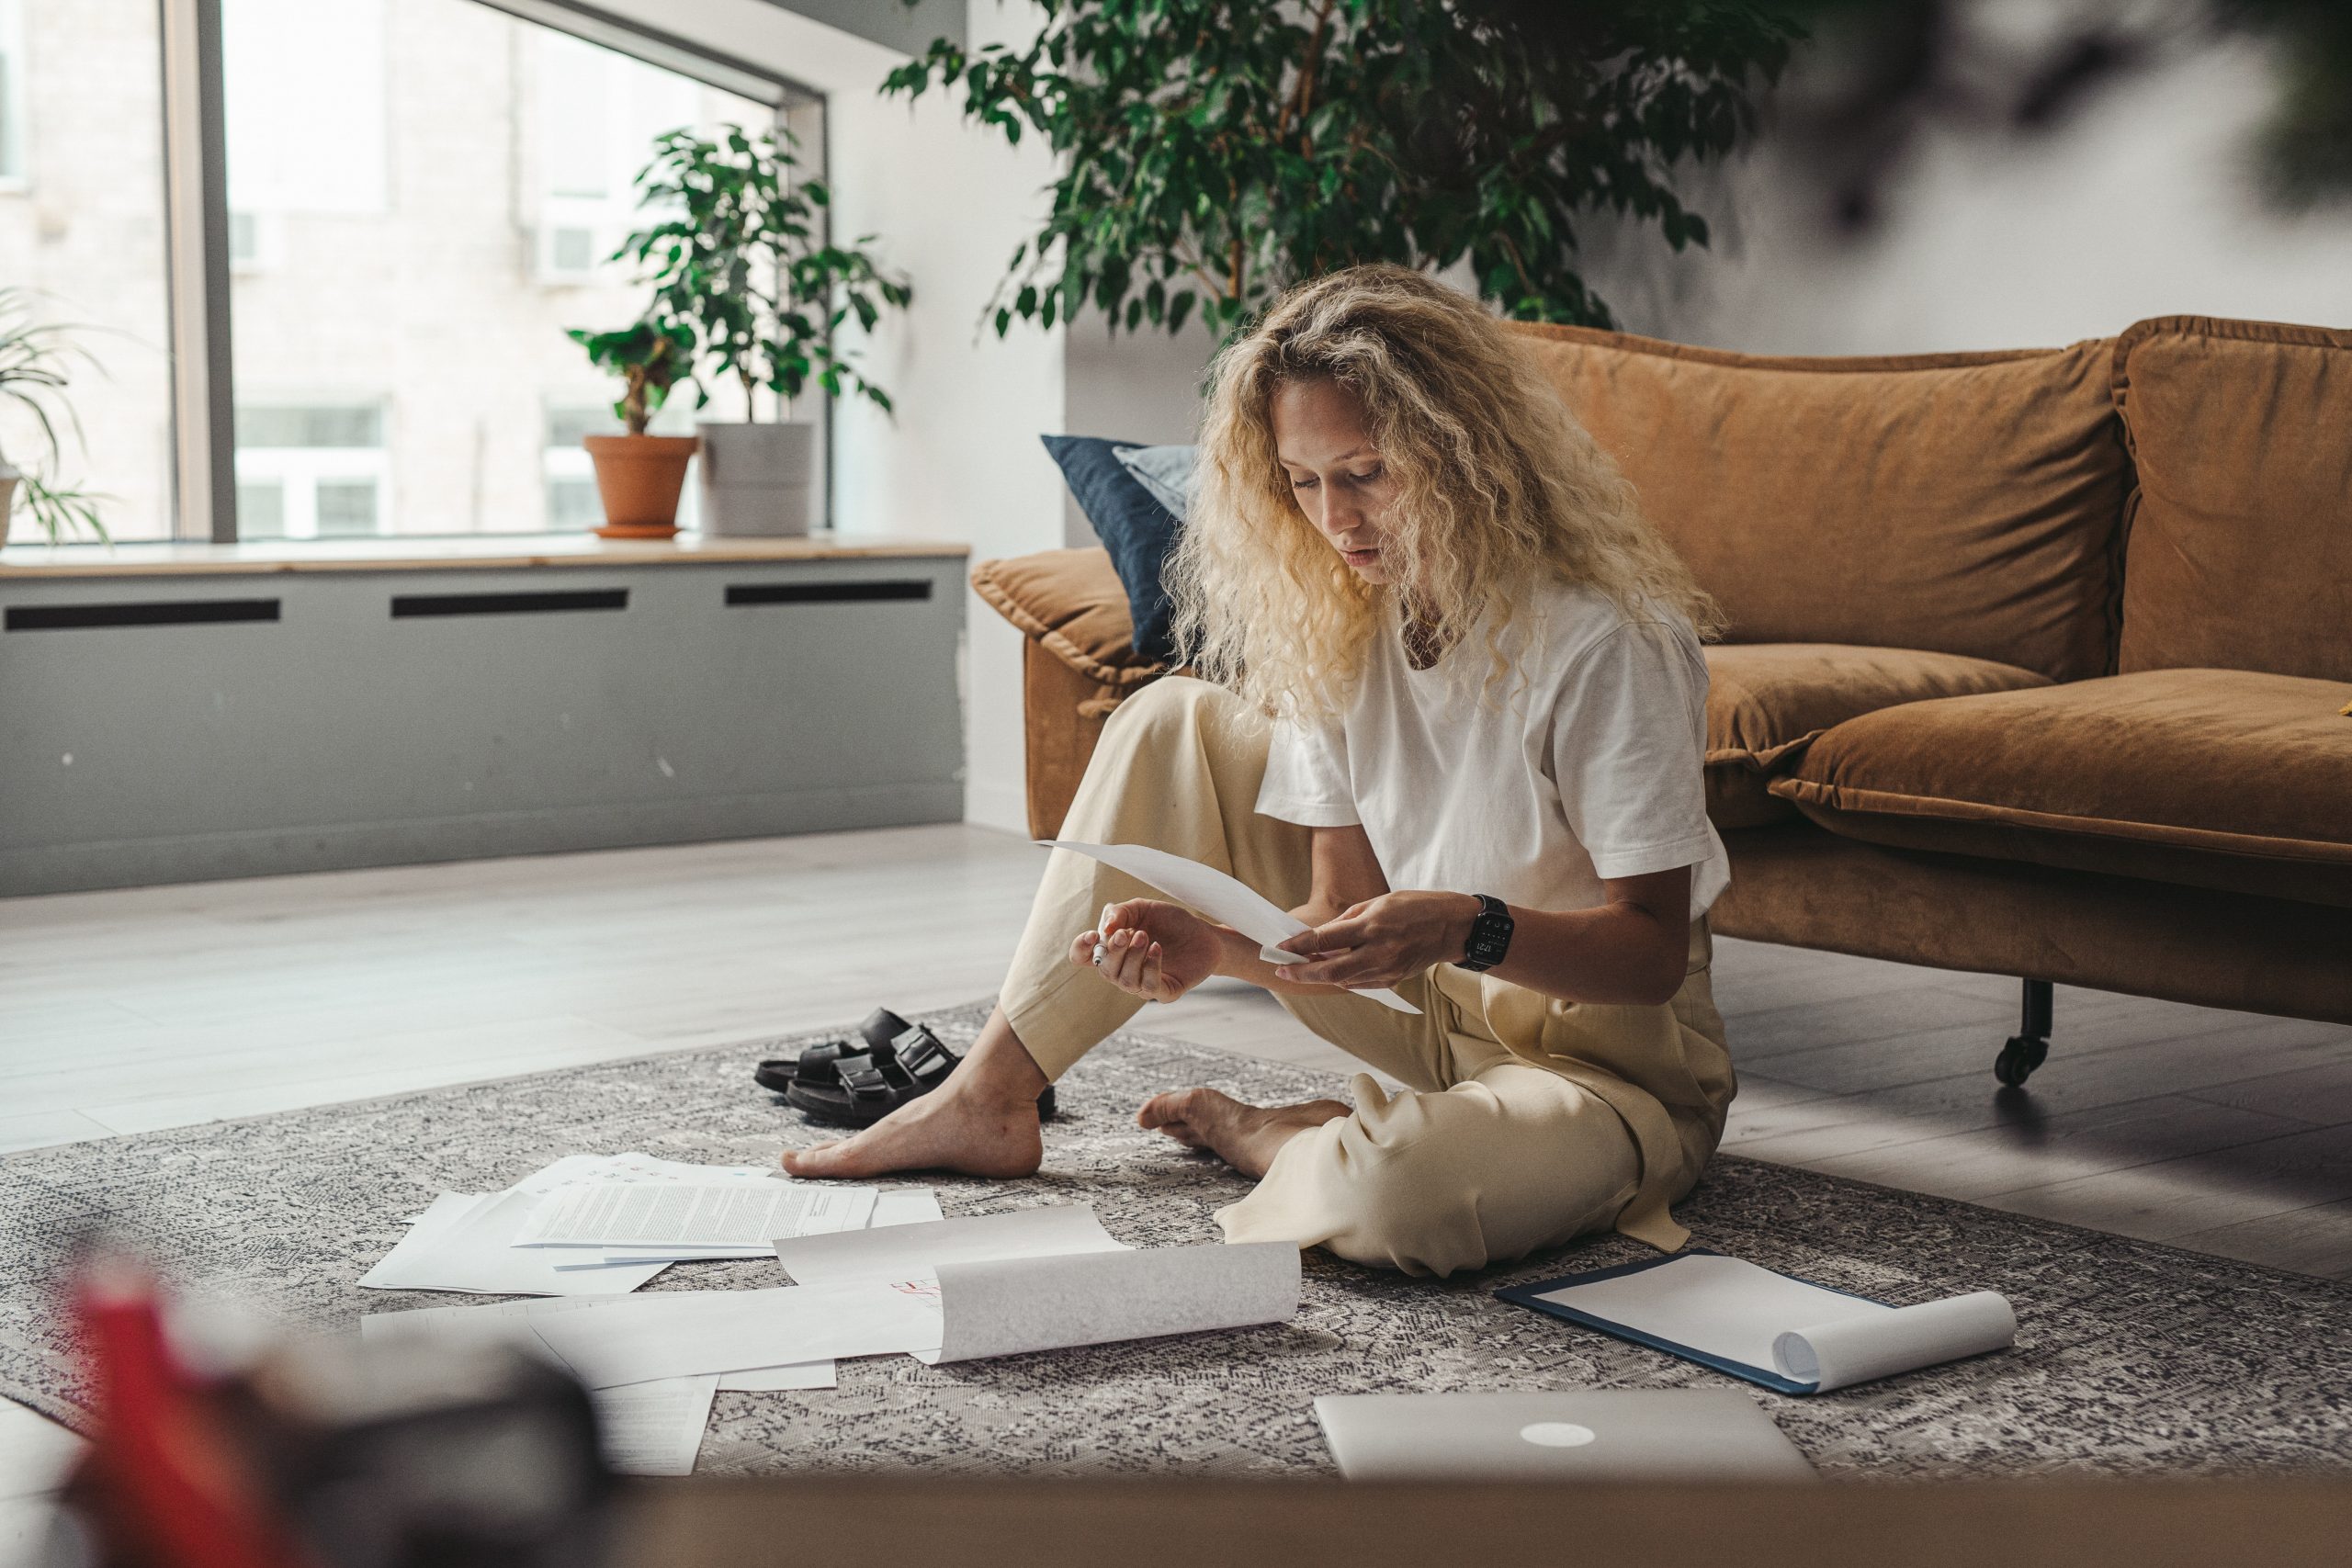 A blonde woman sorts through the paperwork of her finances, sitting on a rug on floor in her living room.